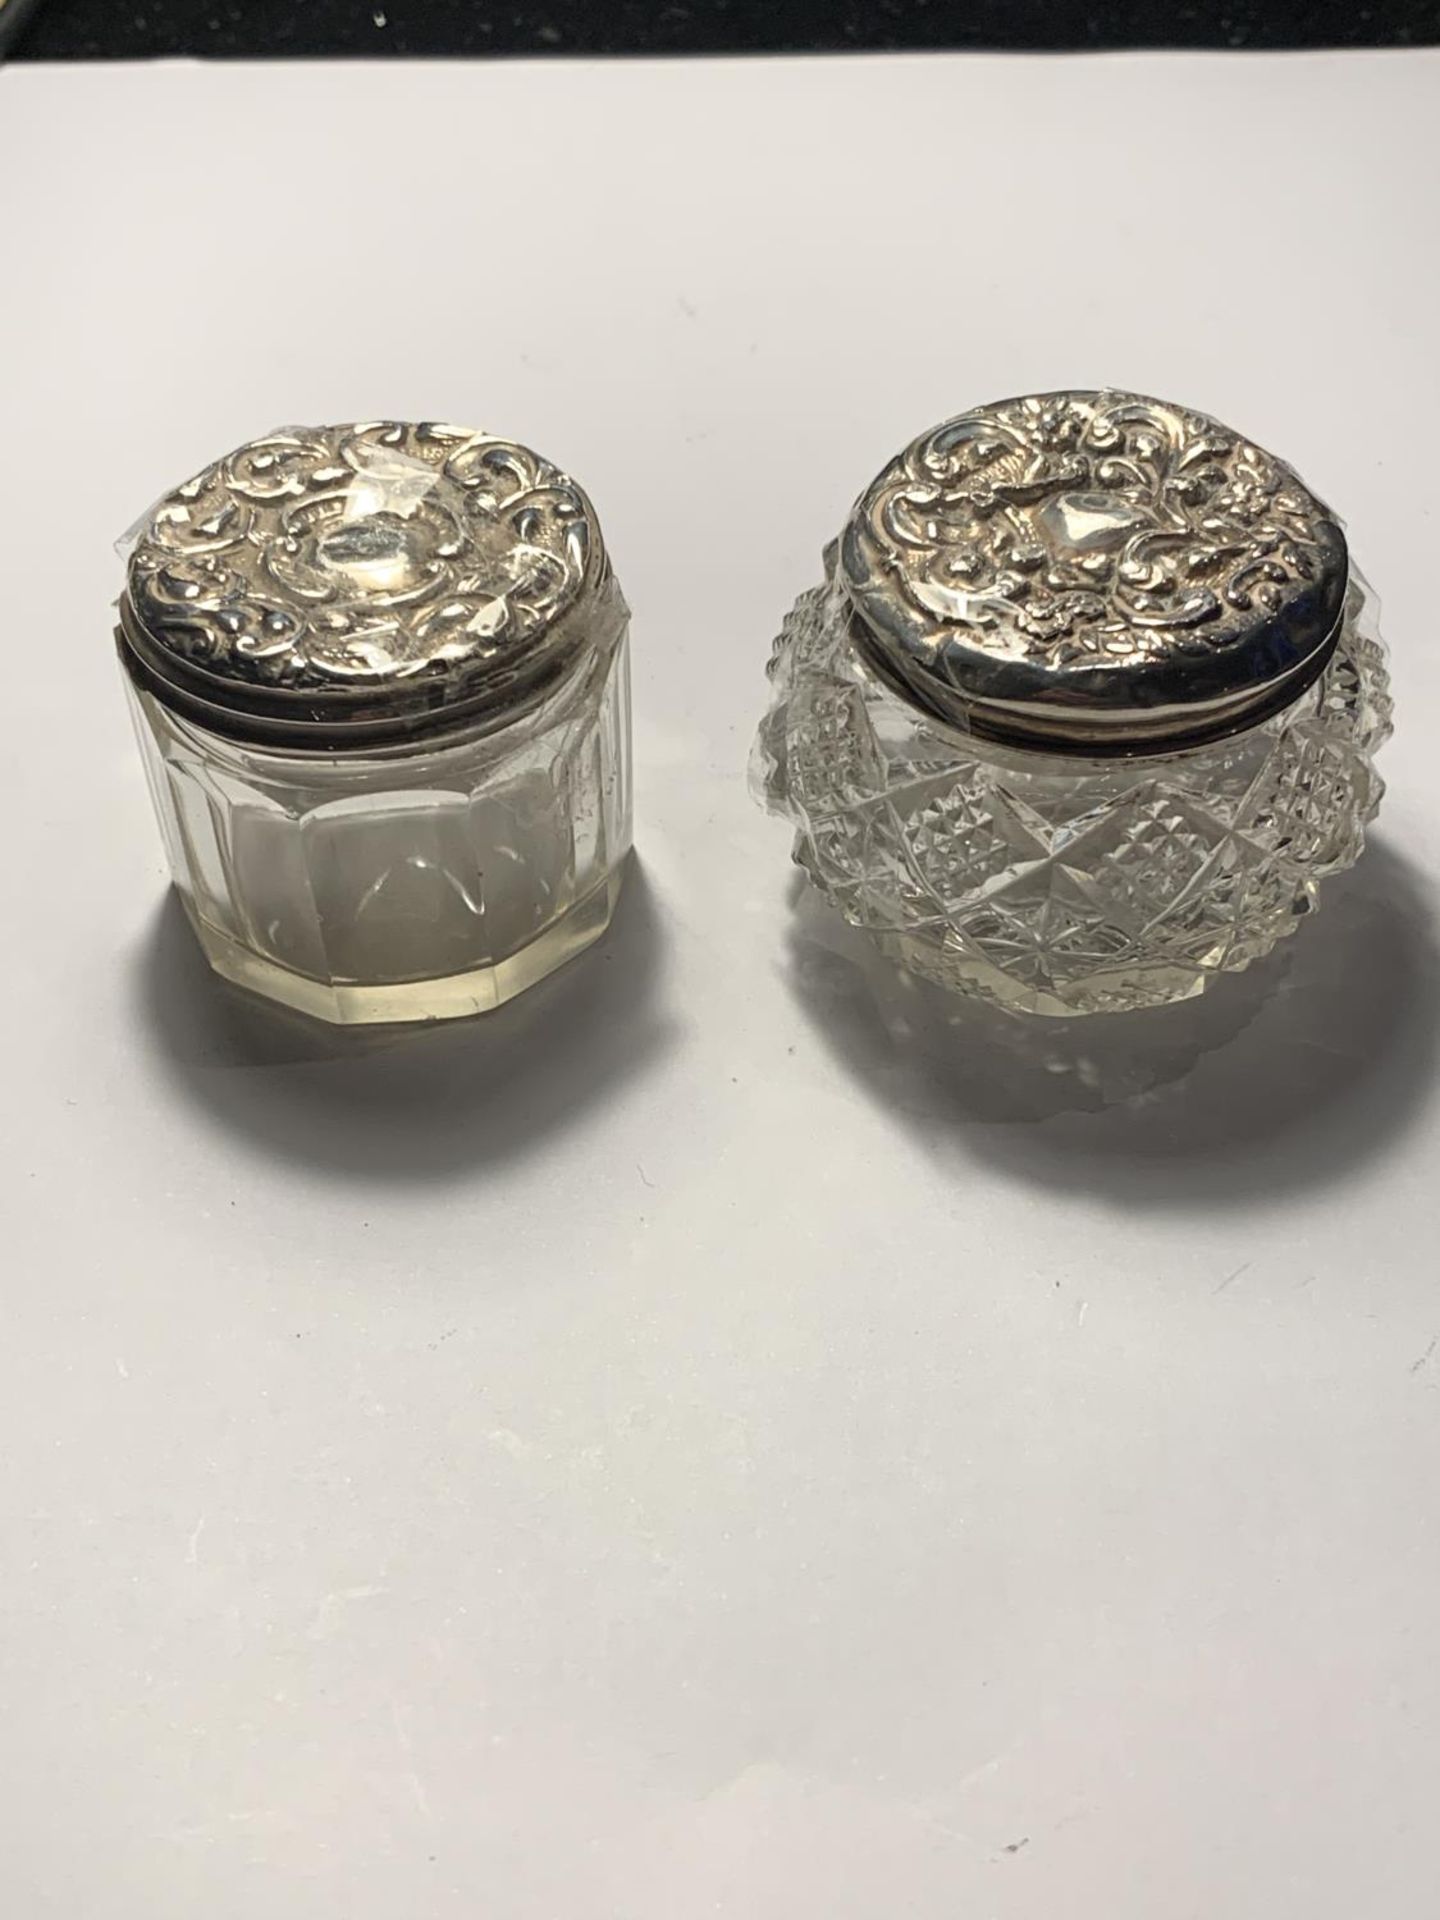 TWO GLASS JARS WITH ORNATE SILVER TOPS